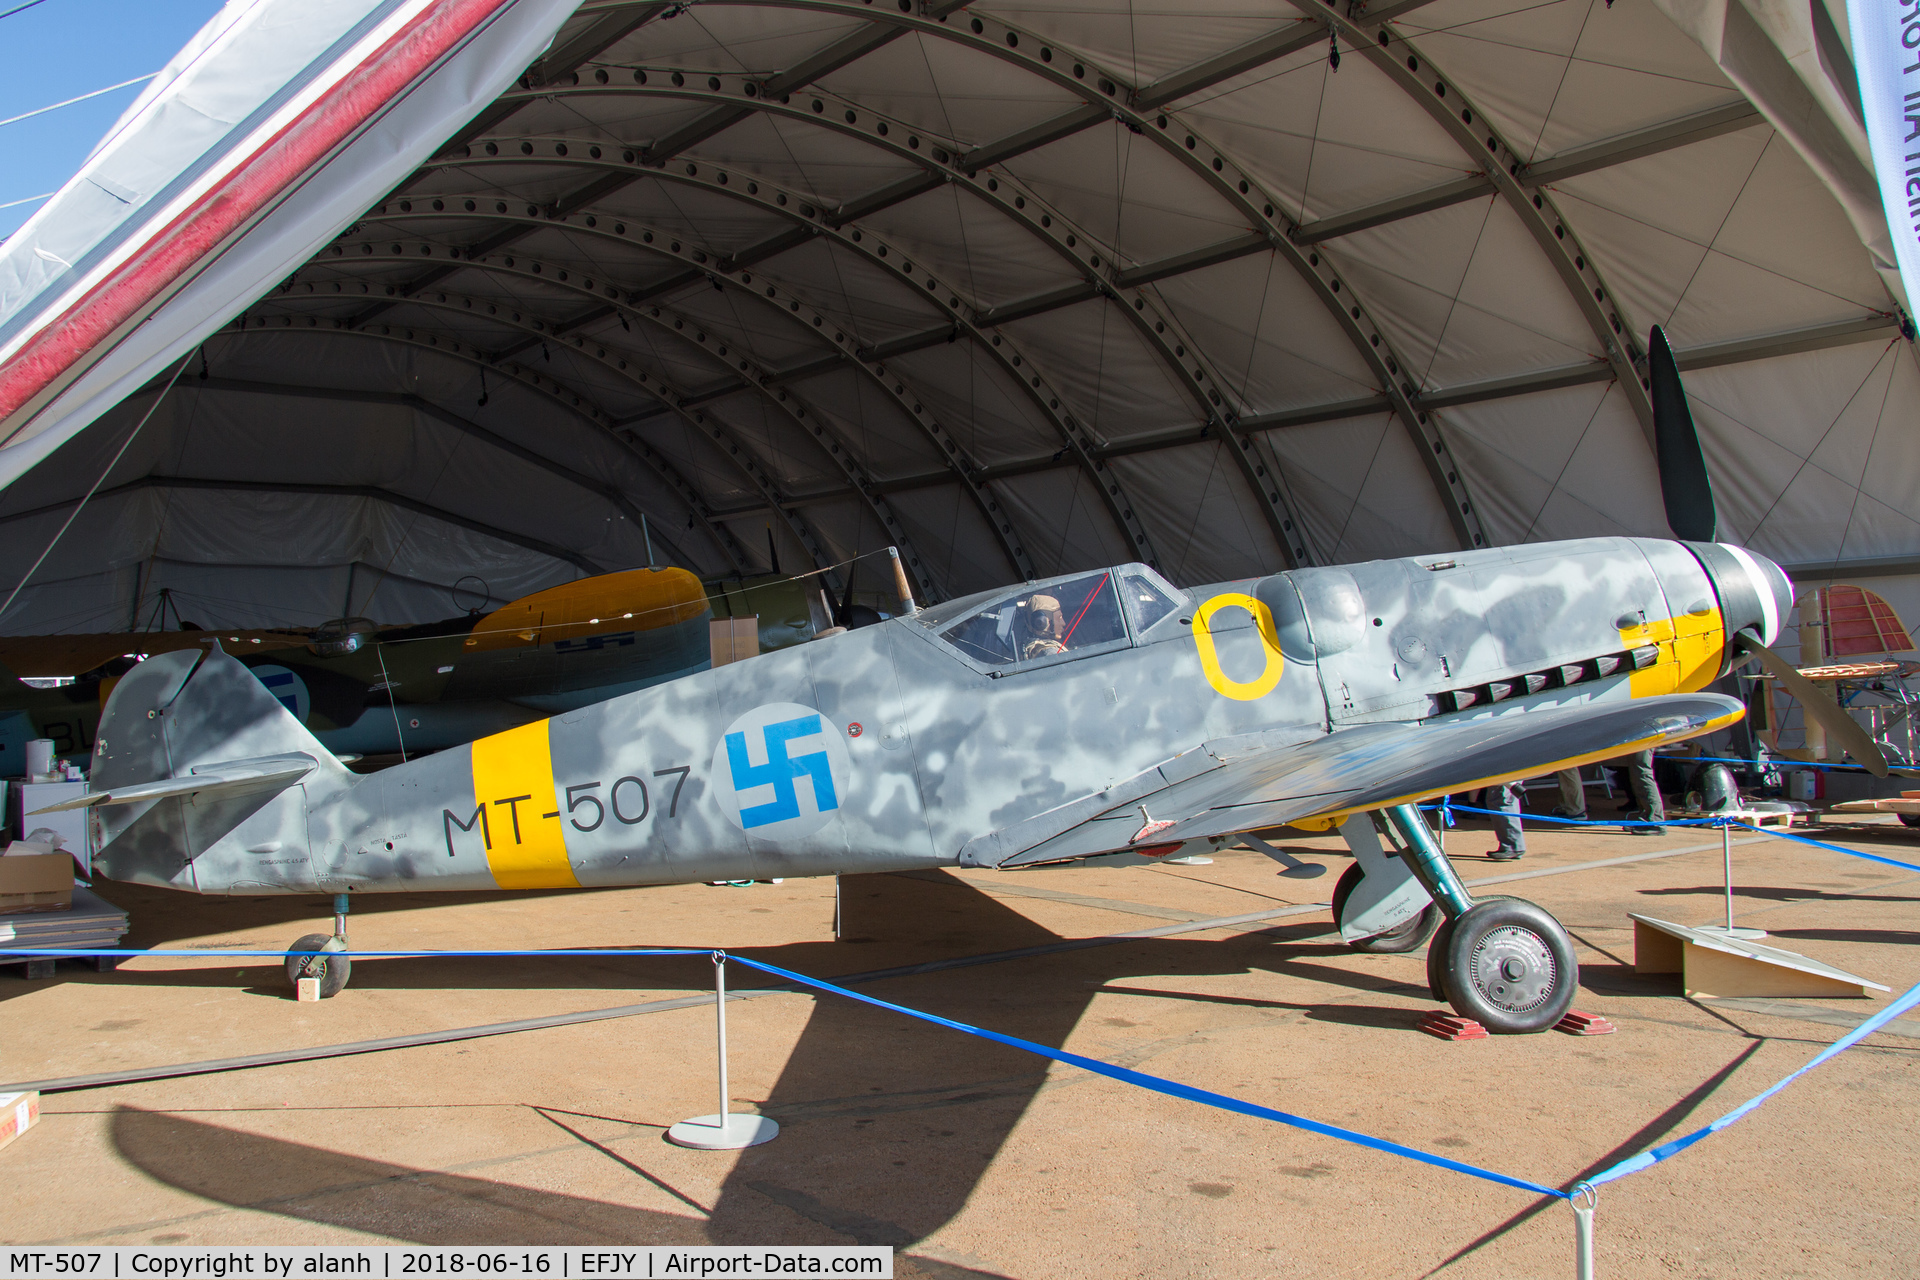 MT-507, Messerschmitt Bf-109G-6 C/N 167271, Part of the Central Finnland Aviation Museum display at the 100th Anniversary of the Finnish Air Force airshow